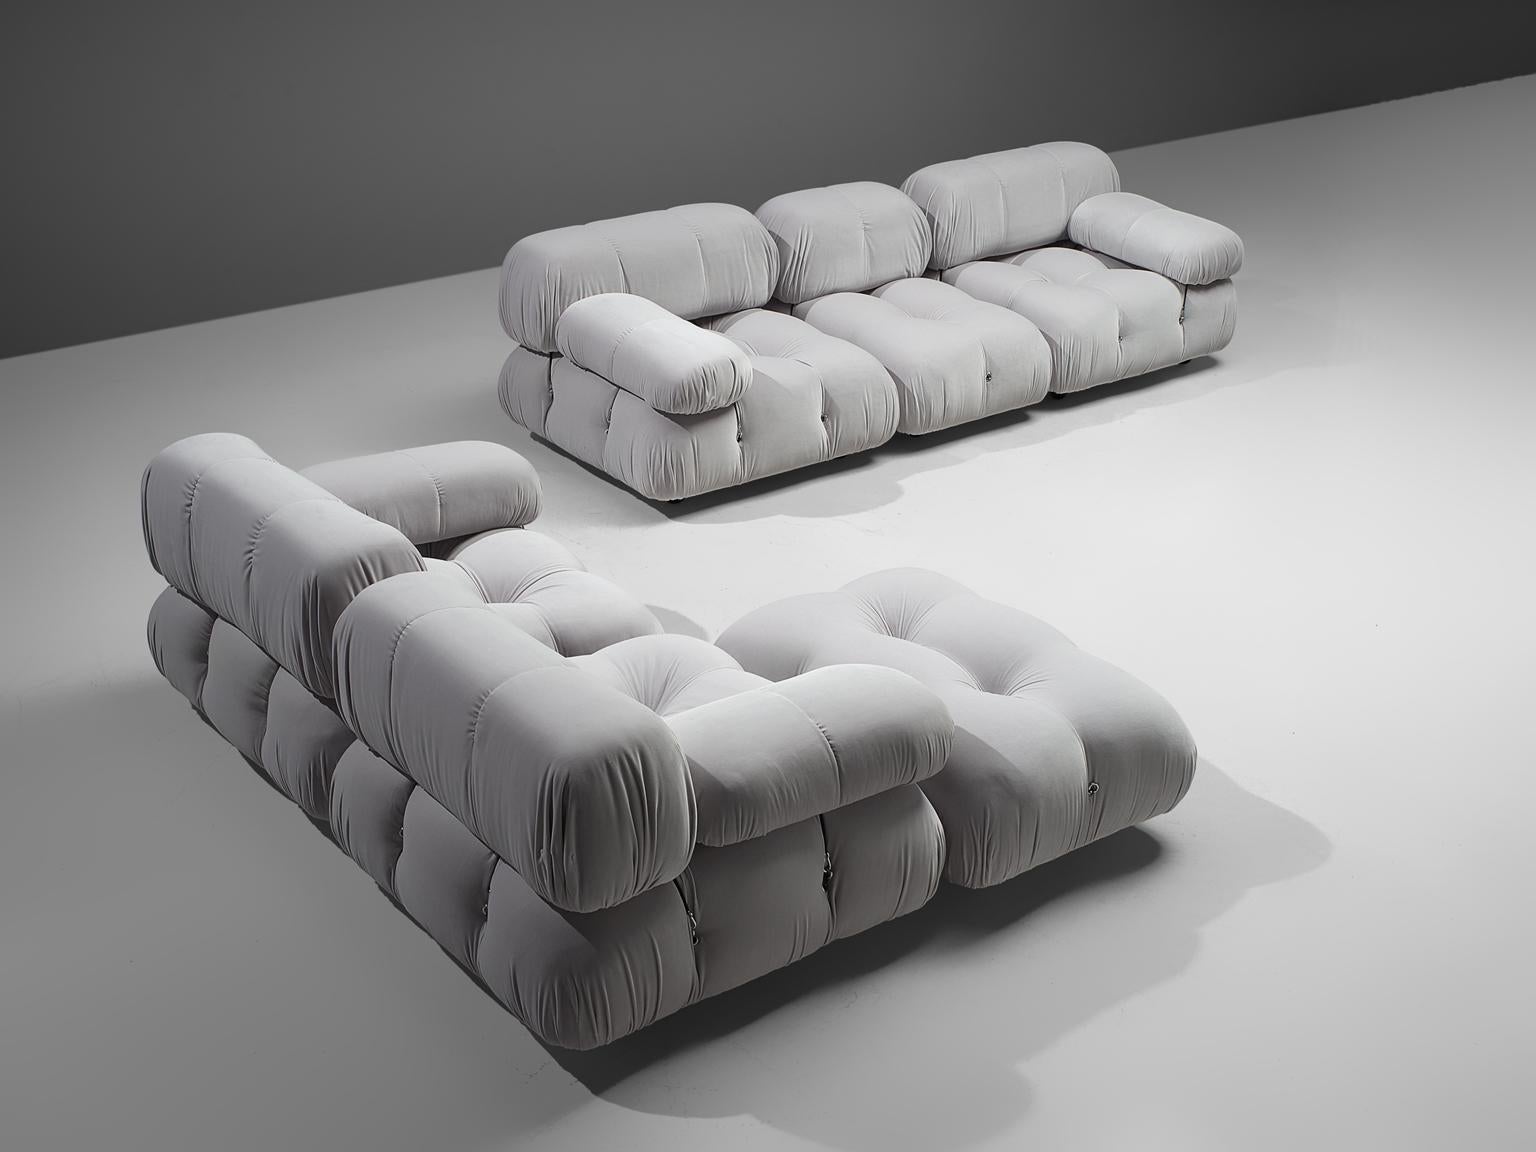 Mario Bellini, modular 'Cameleonda' sofa in light grey velvet, Italy, 1972.

The sectional elements of this sofa can be used freely and apart from one another. The upholstery on this piece features a high quality light grey velvet by Dedar Milano.